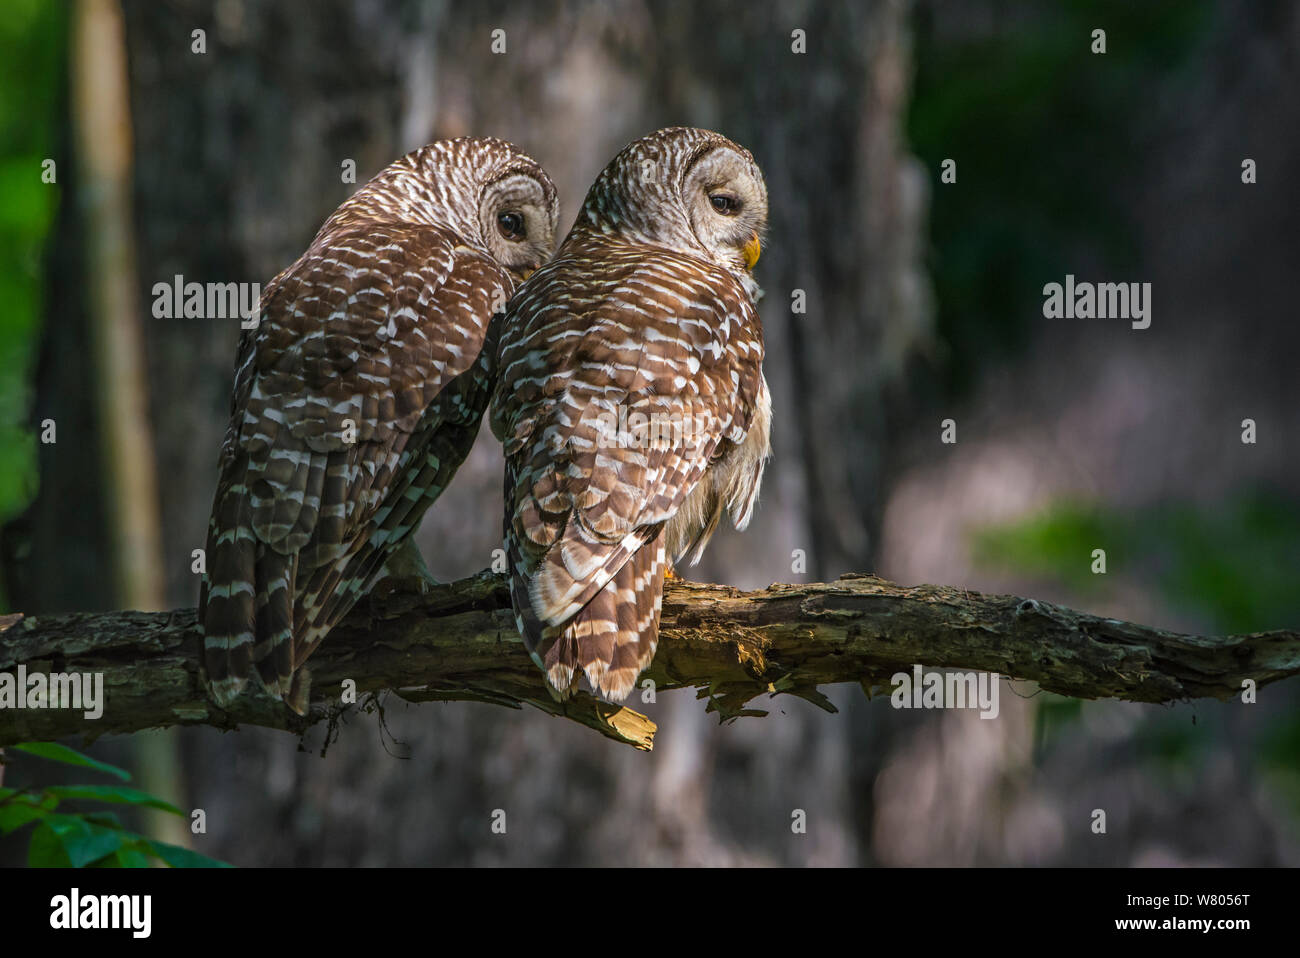 Barred owl (Strix varia) two sitting side by side, rear view, Corkscrew Swamp Audubon Sanctuary, Florida, USA, March. Stock Photo